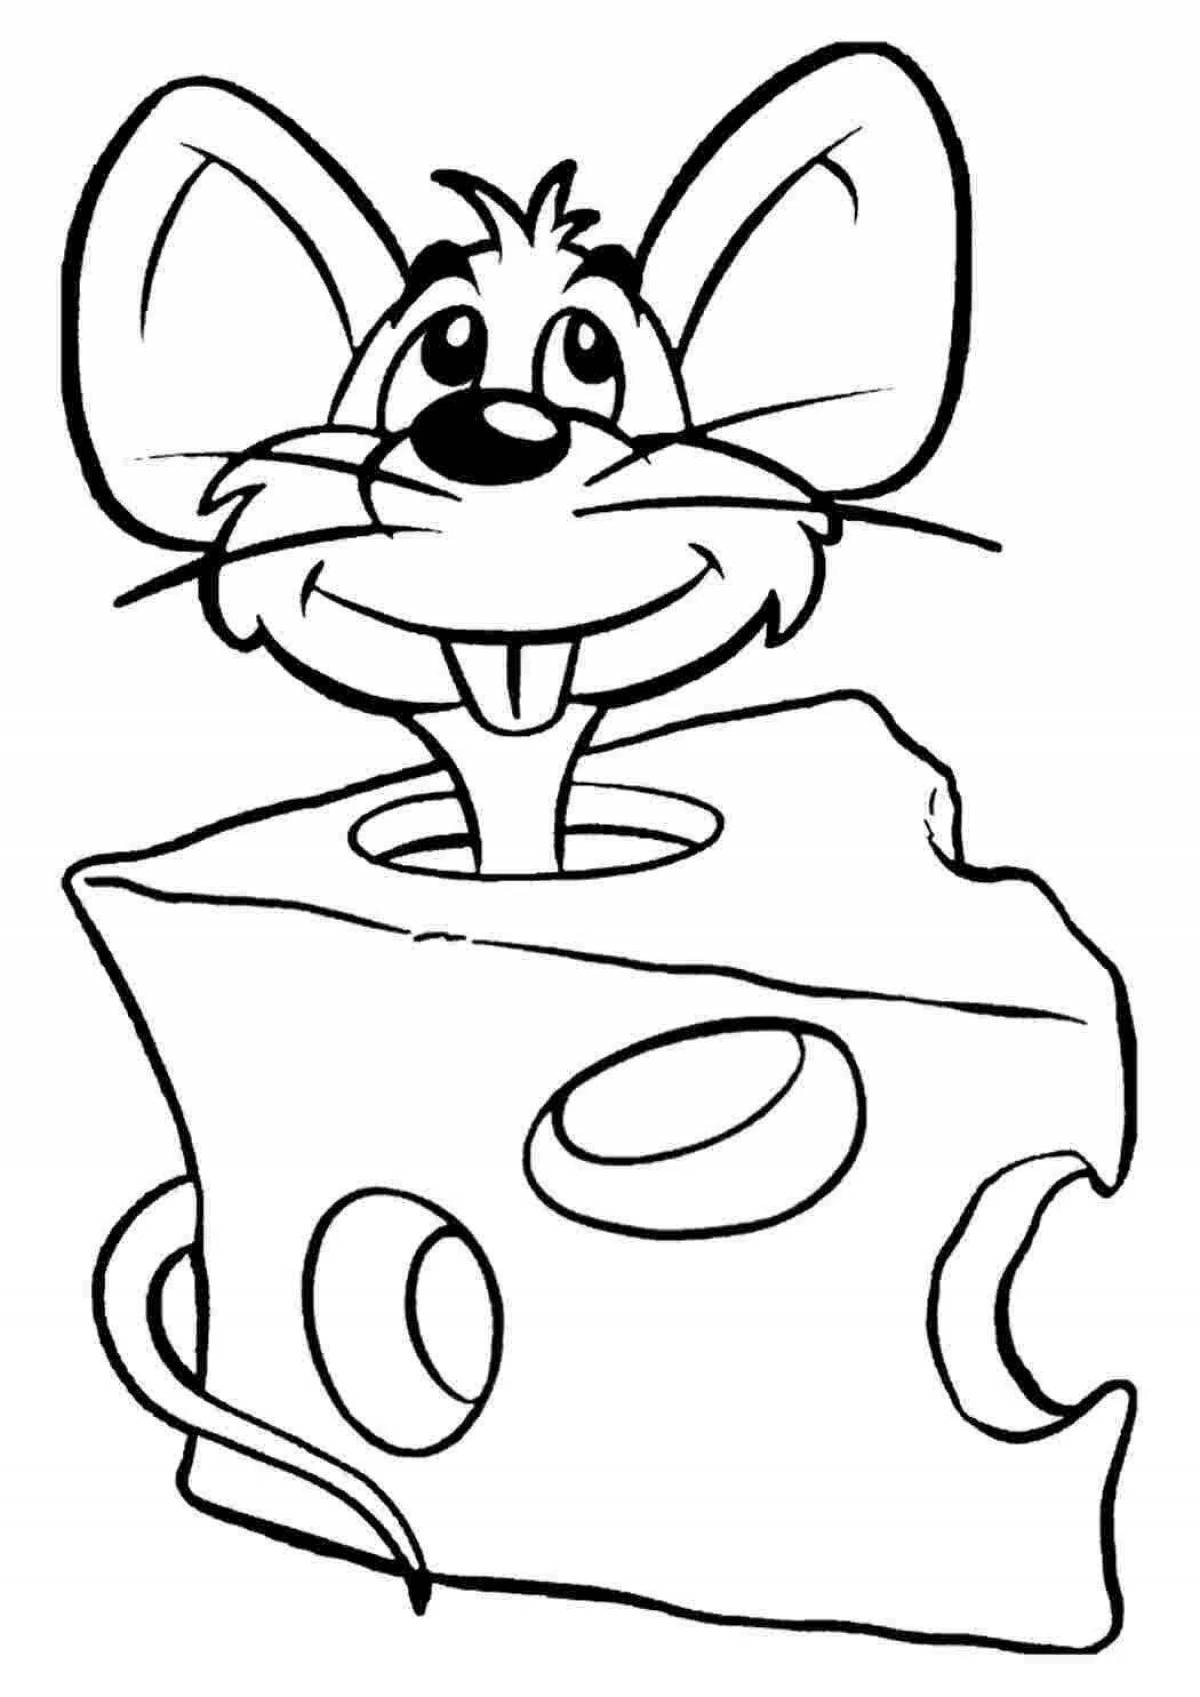 Mouse with cheese #3